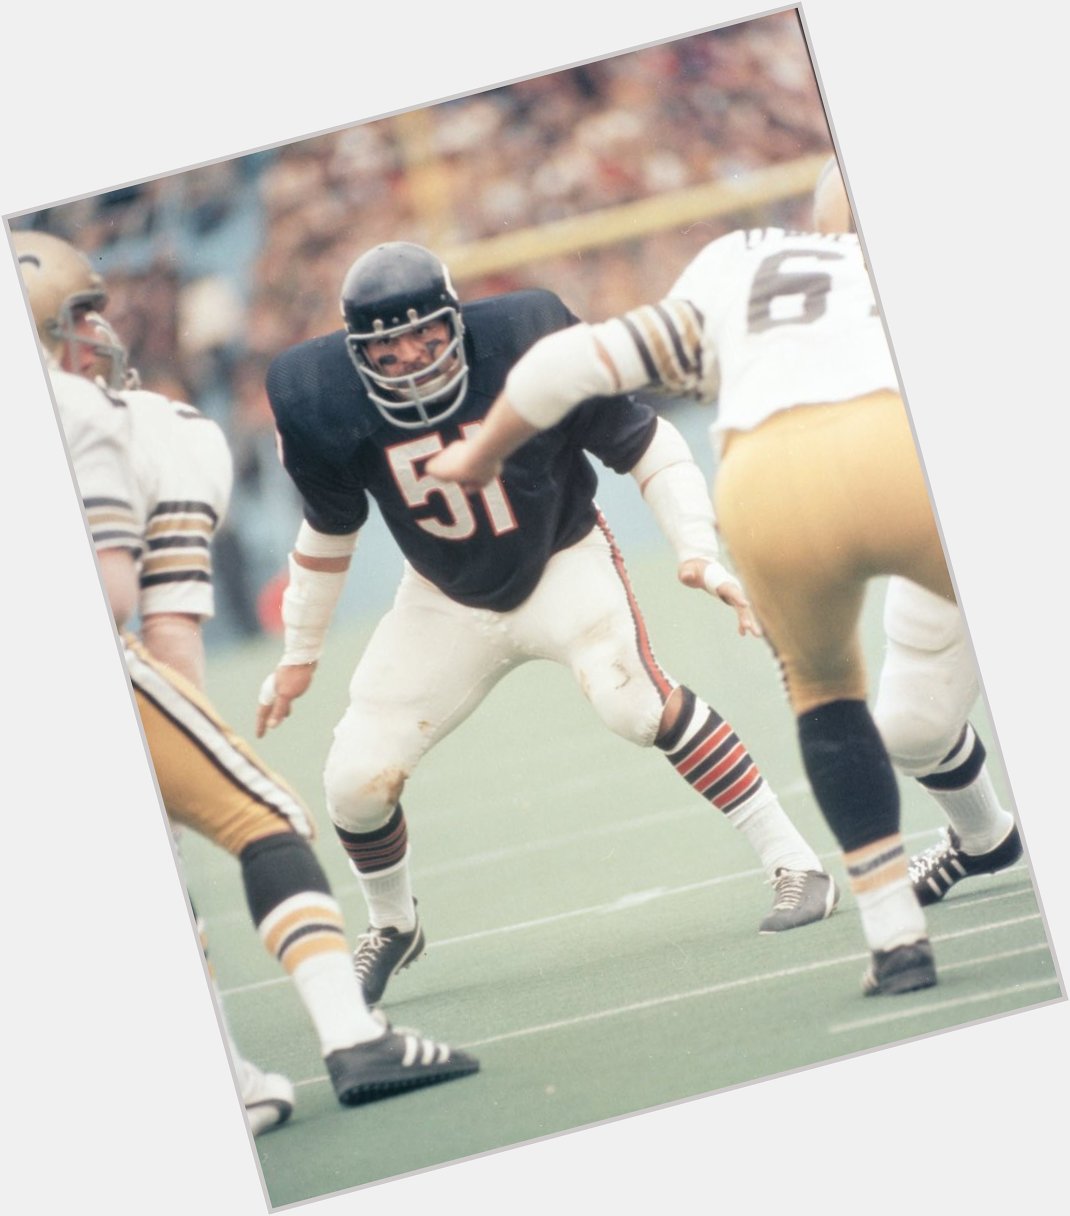 Happy Birthday to Dick Butkus-the baddest old school bad ass of all time   